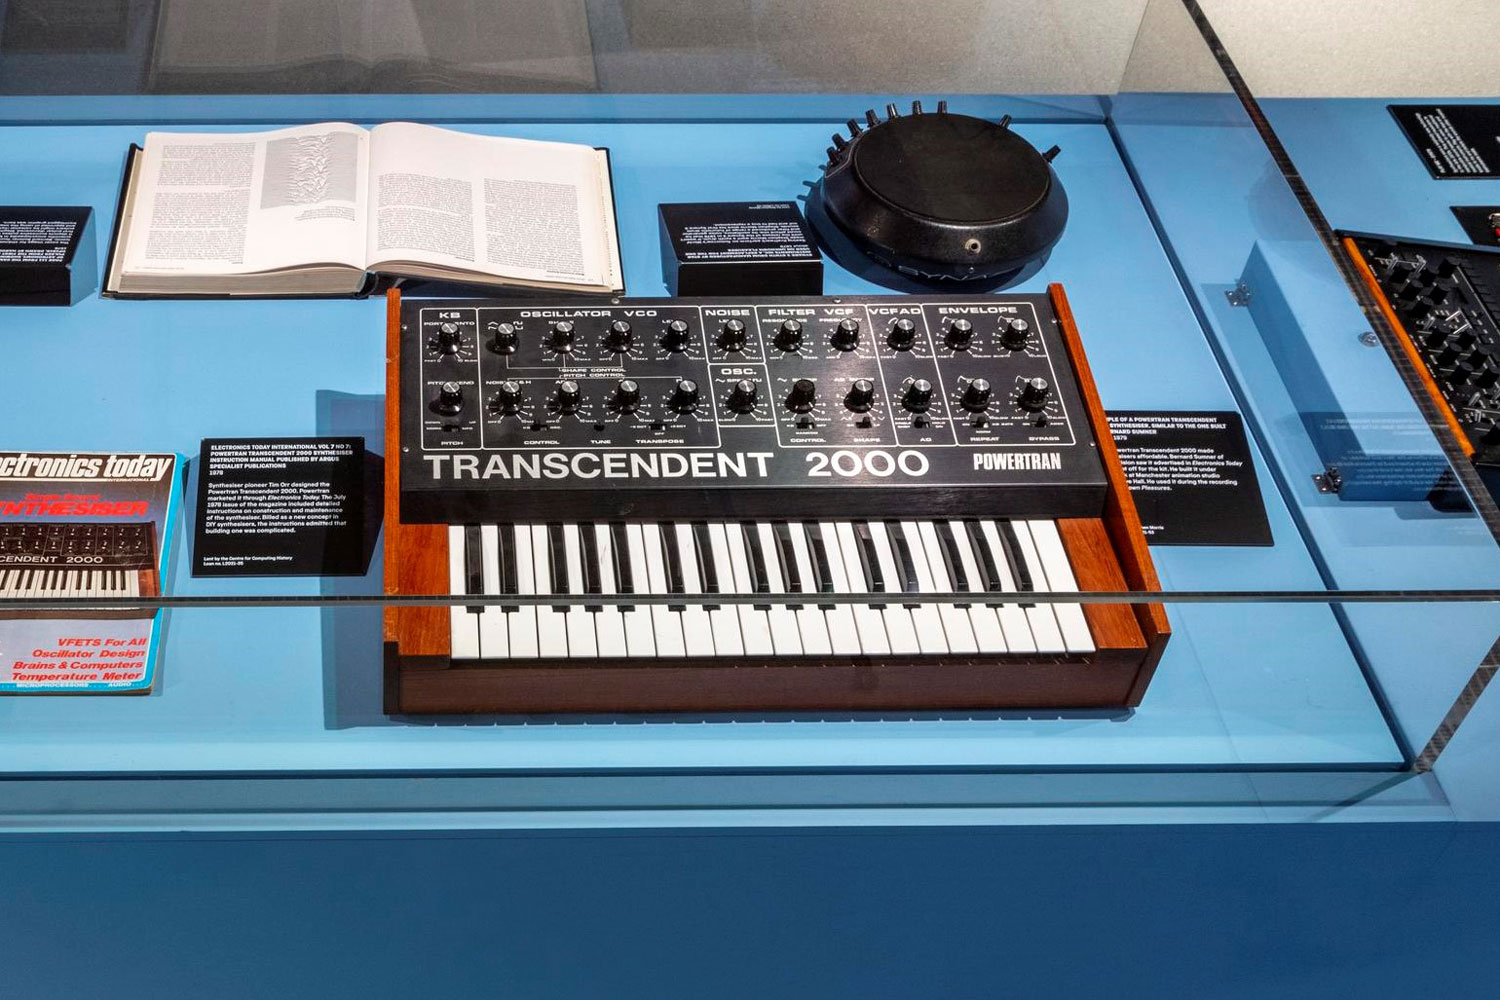 Close up of the PowerTran Transcendent 2000 synthesiser on display in Use Hearing Protection